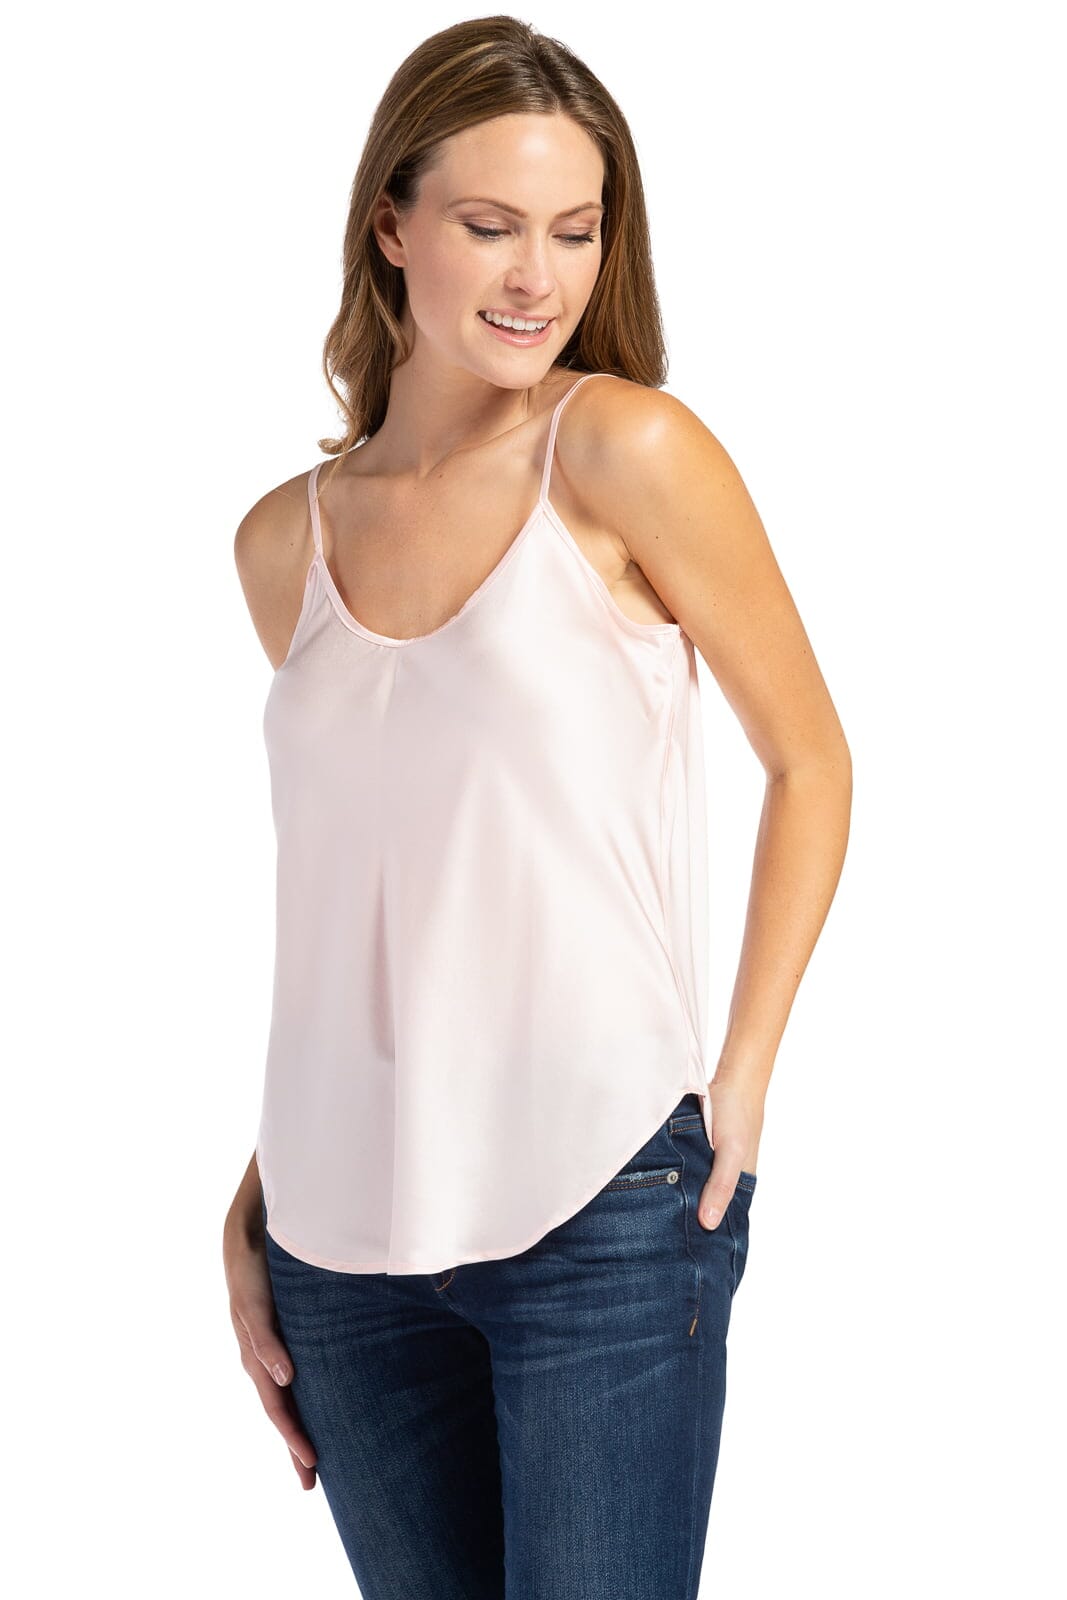 Women's 100% Pure Mulberry Silk Camisole Tank Top with Adjustable Spaghetti Straps - IMPROVED FIT Womens>Casual>Top Fishers Finery Heavenly Pink X-Small 